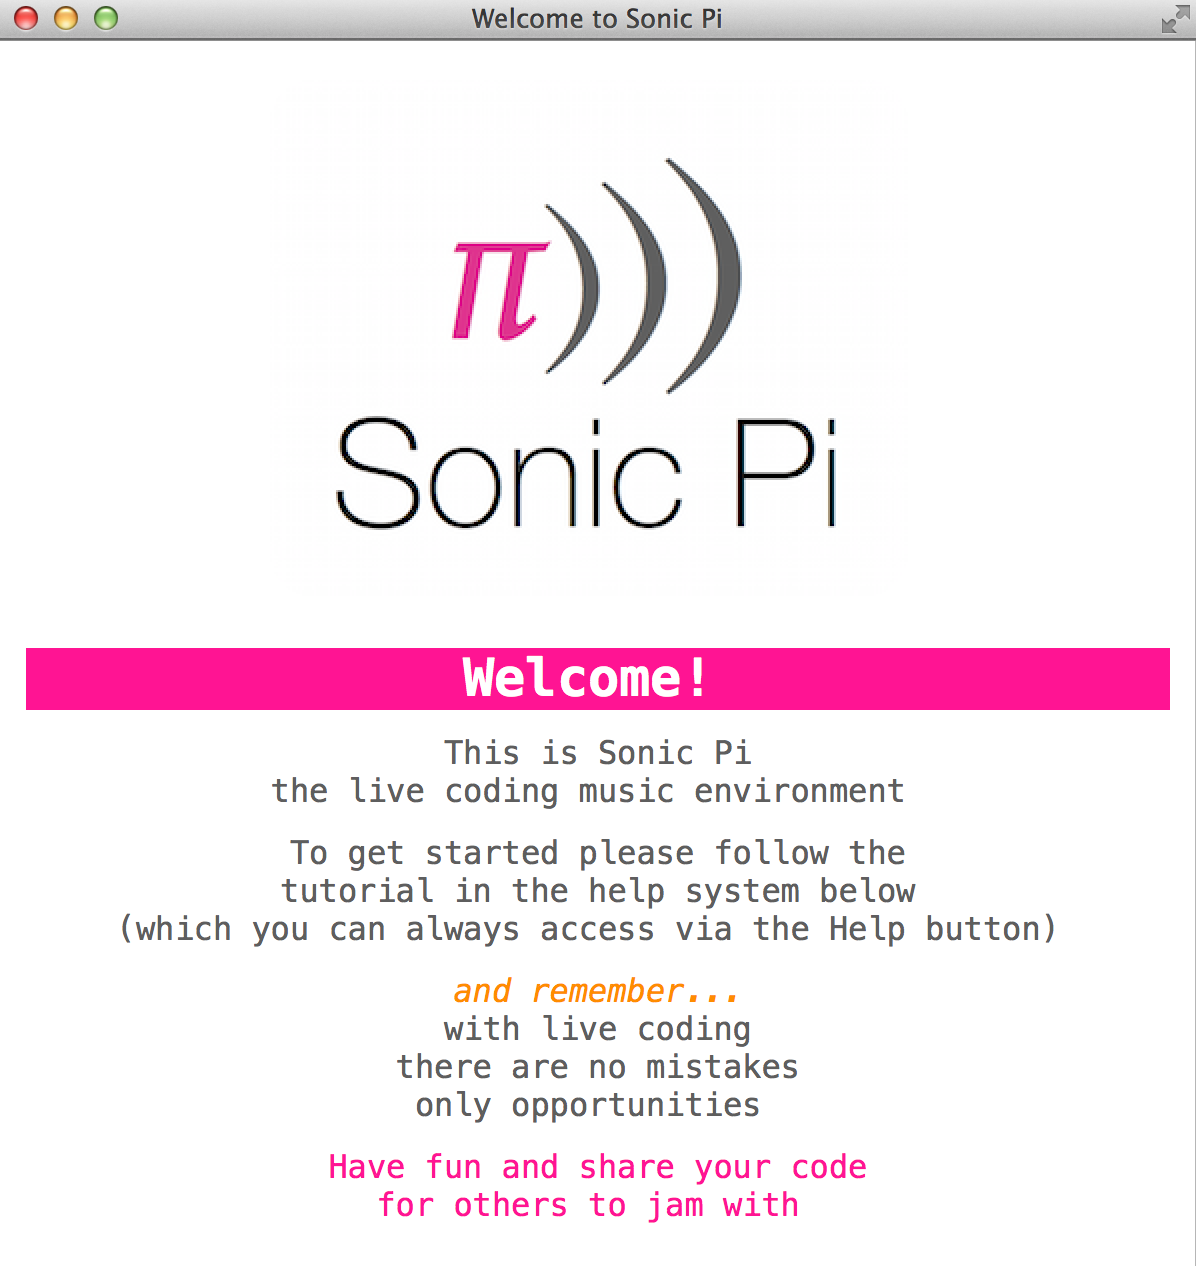 Sonic Pi welcome